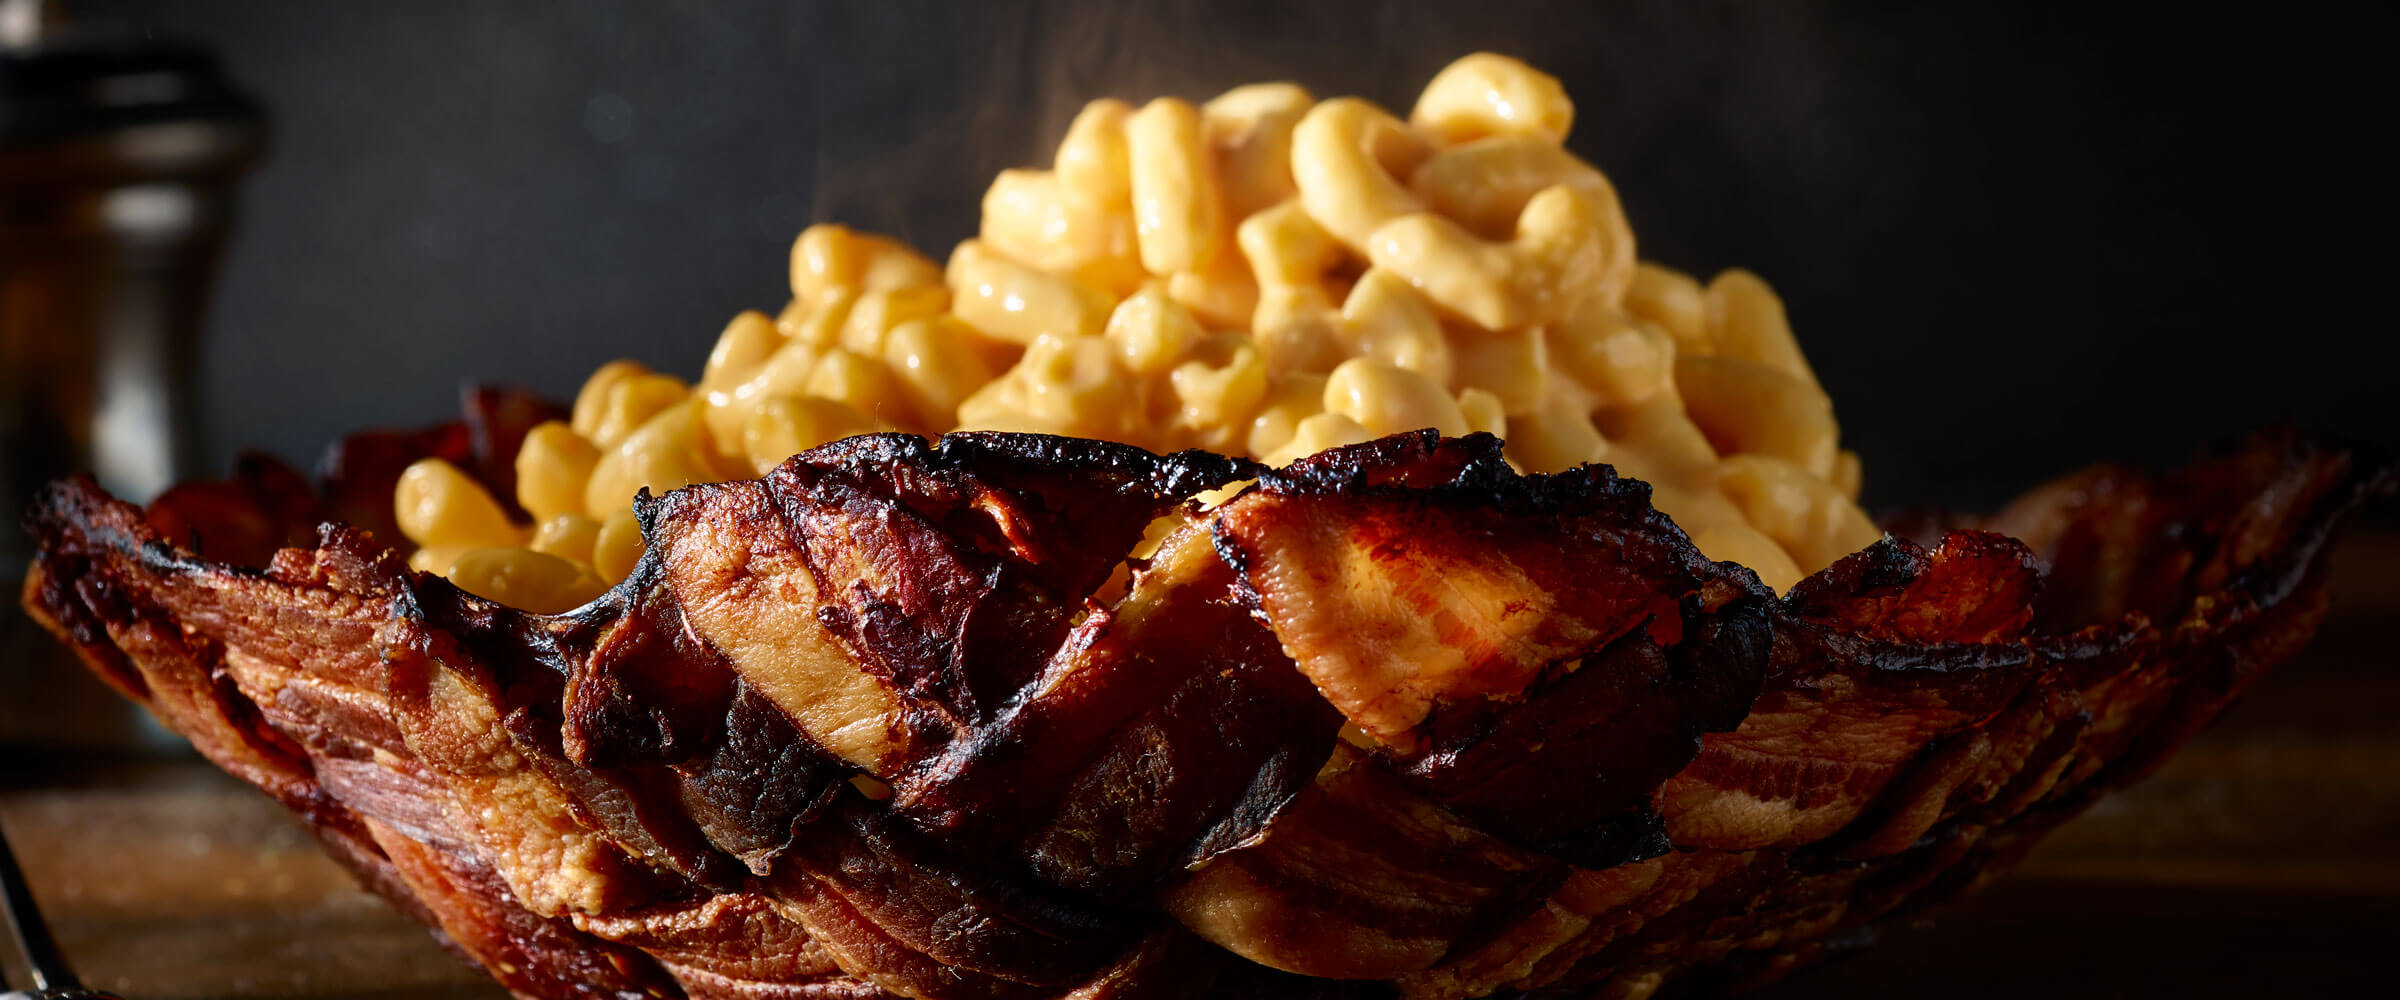 Bacon Bowl with macaroni and cheese